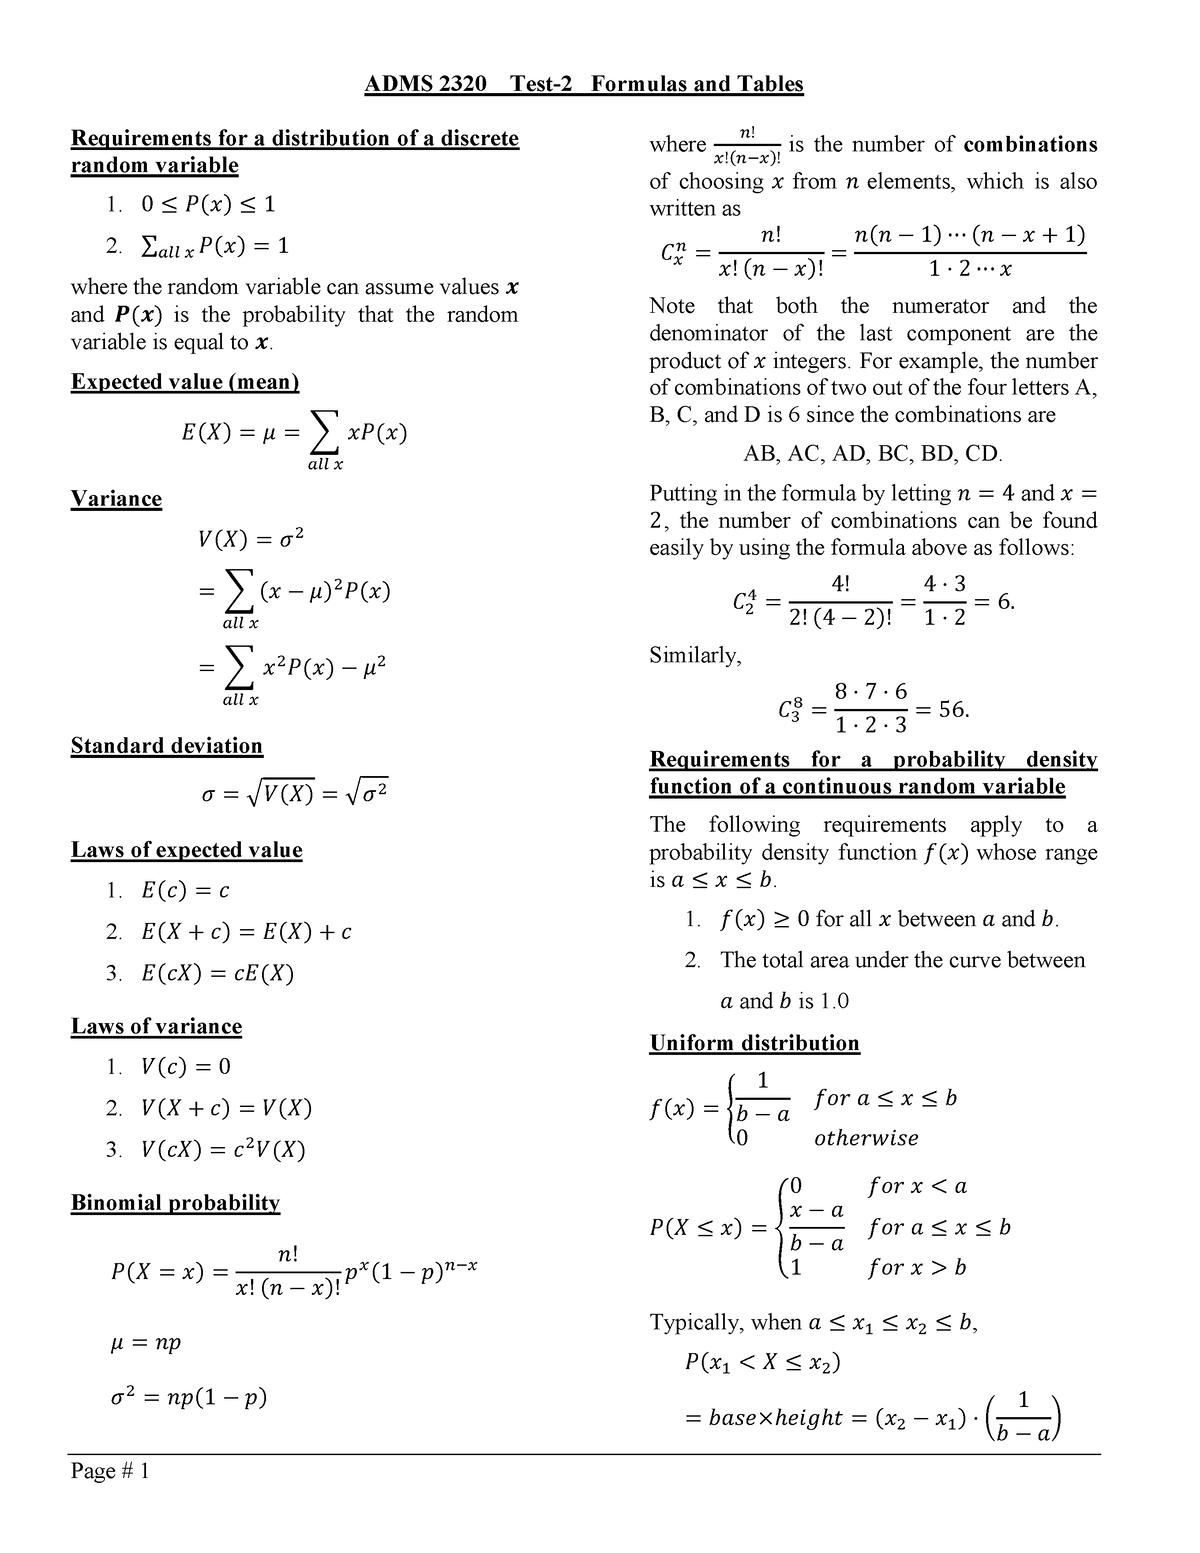 adms-2320-test-2-formula-sheet-requirements-for-a-distribution-of-a